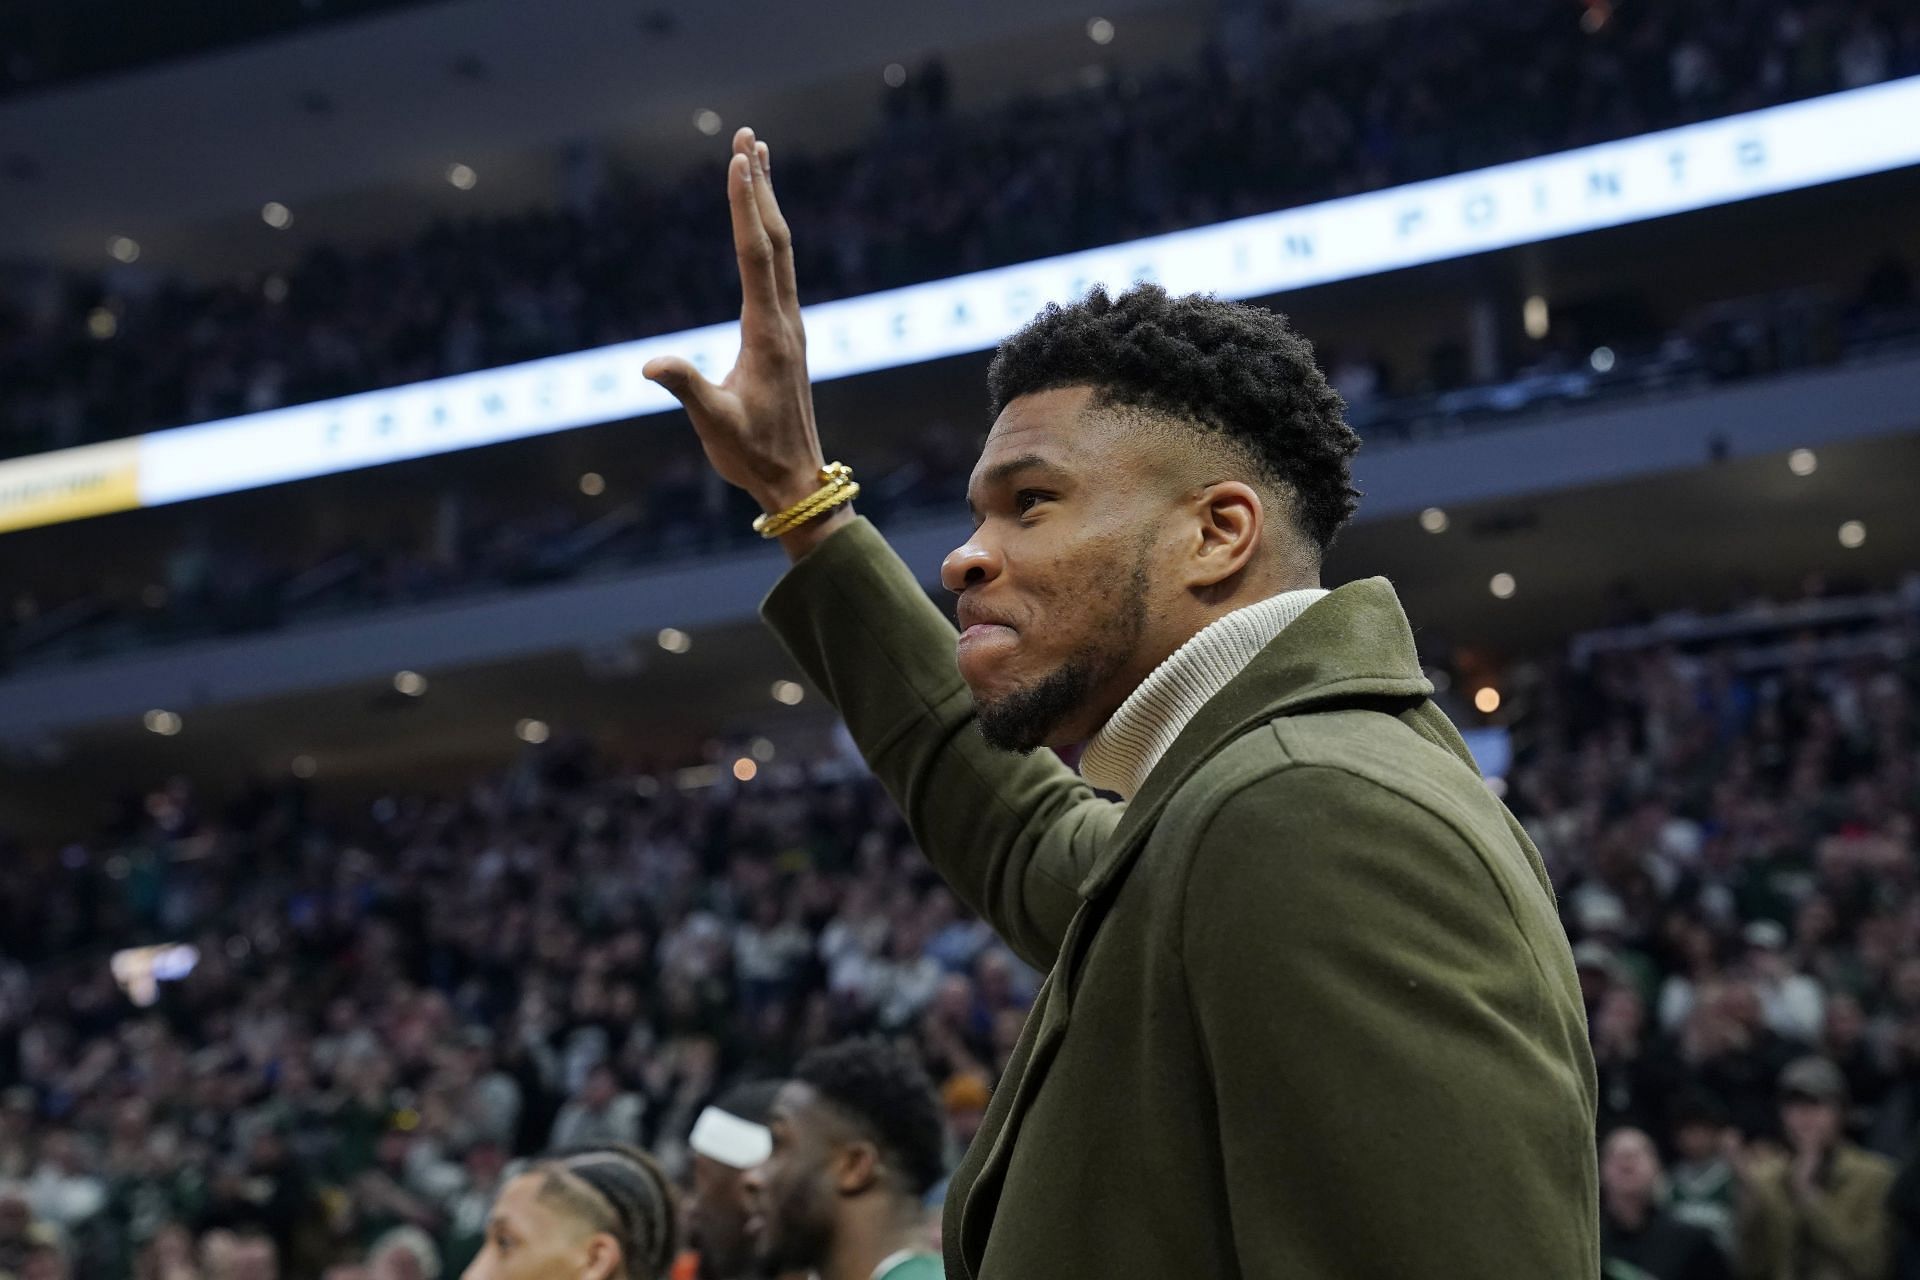 Giannis Antetokounmpo of the Milwaukee Bucks waves as he is honored for passing Kareem Abdul-Jabbar&#039;s Bucks franchise mark of 14,211 points on April 1, 2022 in Milwaukee, Wisconsin.